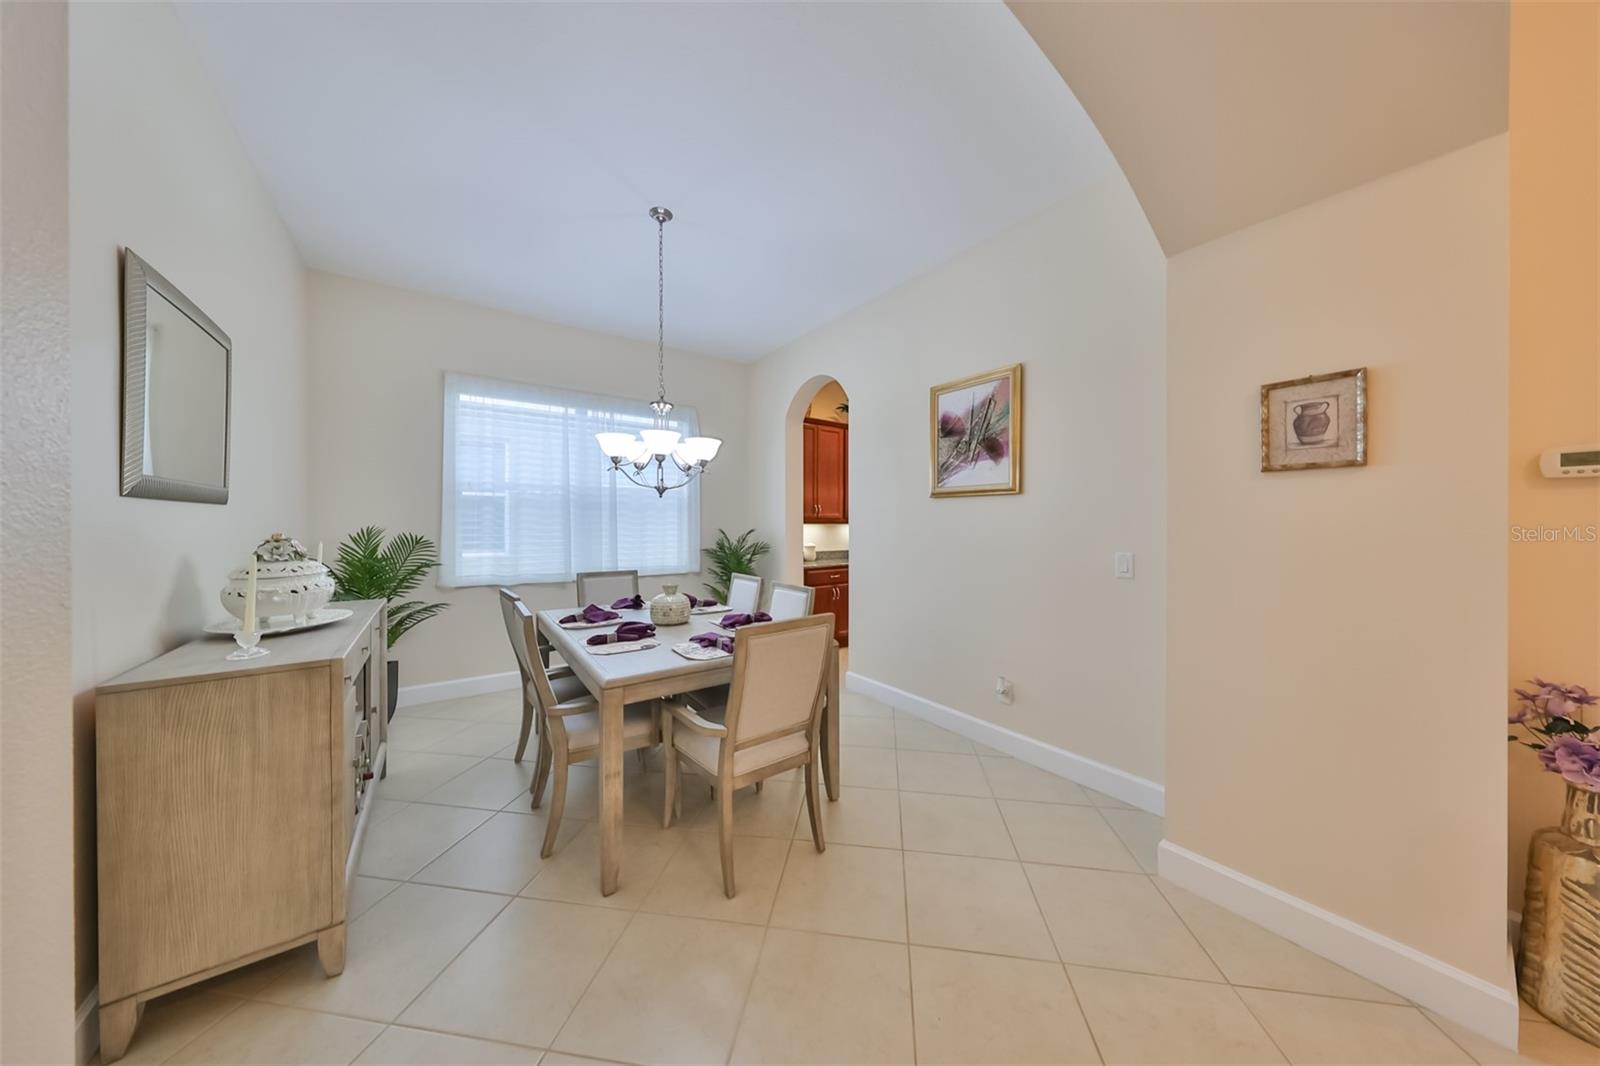 Dining Room is easily accessible to the kitchen, but offers you the privacy of not looking at the dirty dishes!  THIS MODERN FURNITURE SET CONVEYS WITH THE SALE OF THE HOUSE.